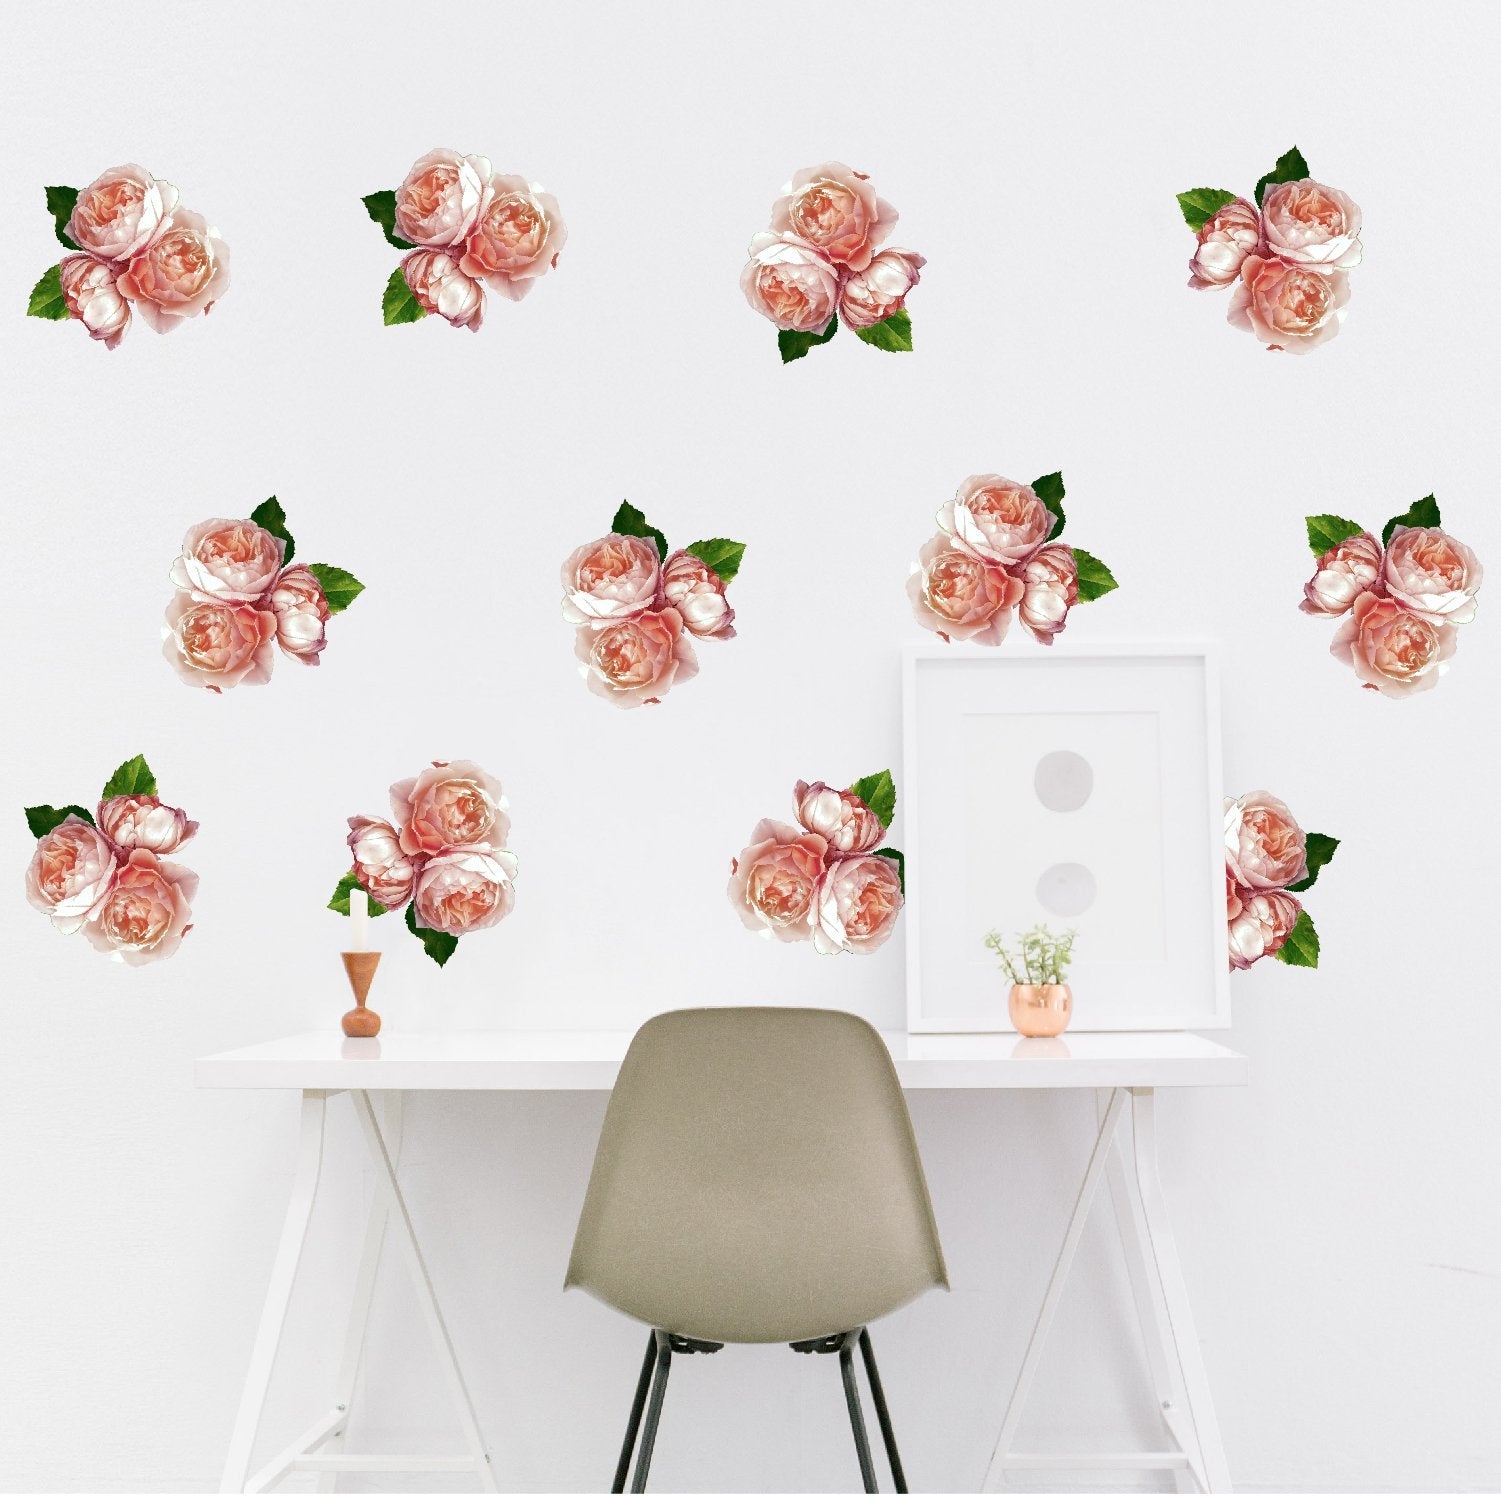 Rose Peonies Flower Clusters | Removable + Reusable Fabric Decals - Picture Perfect Decals